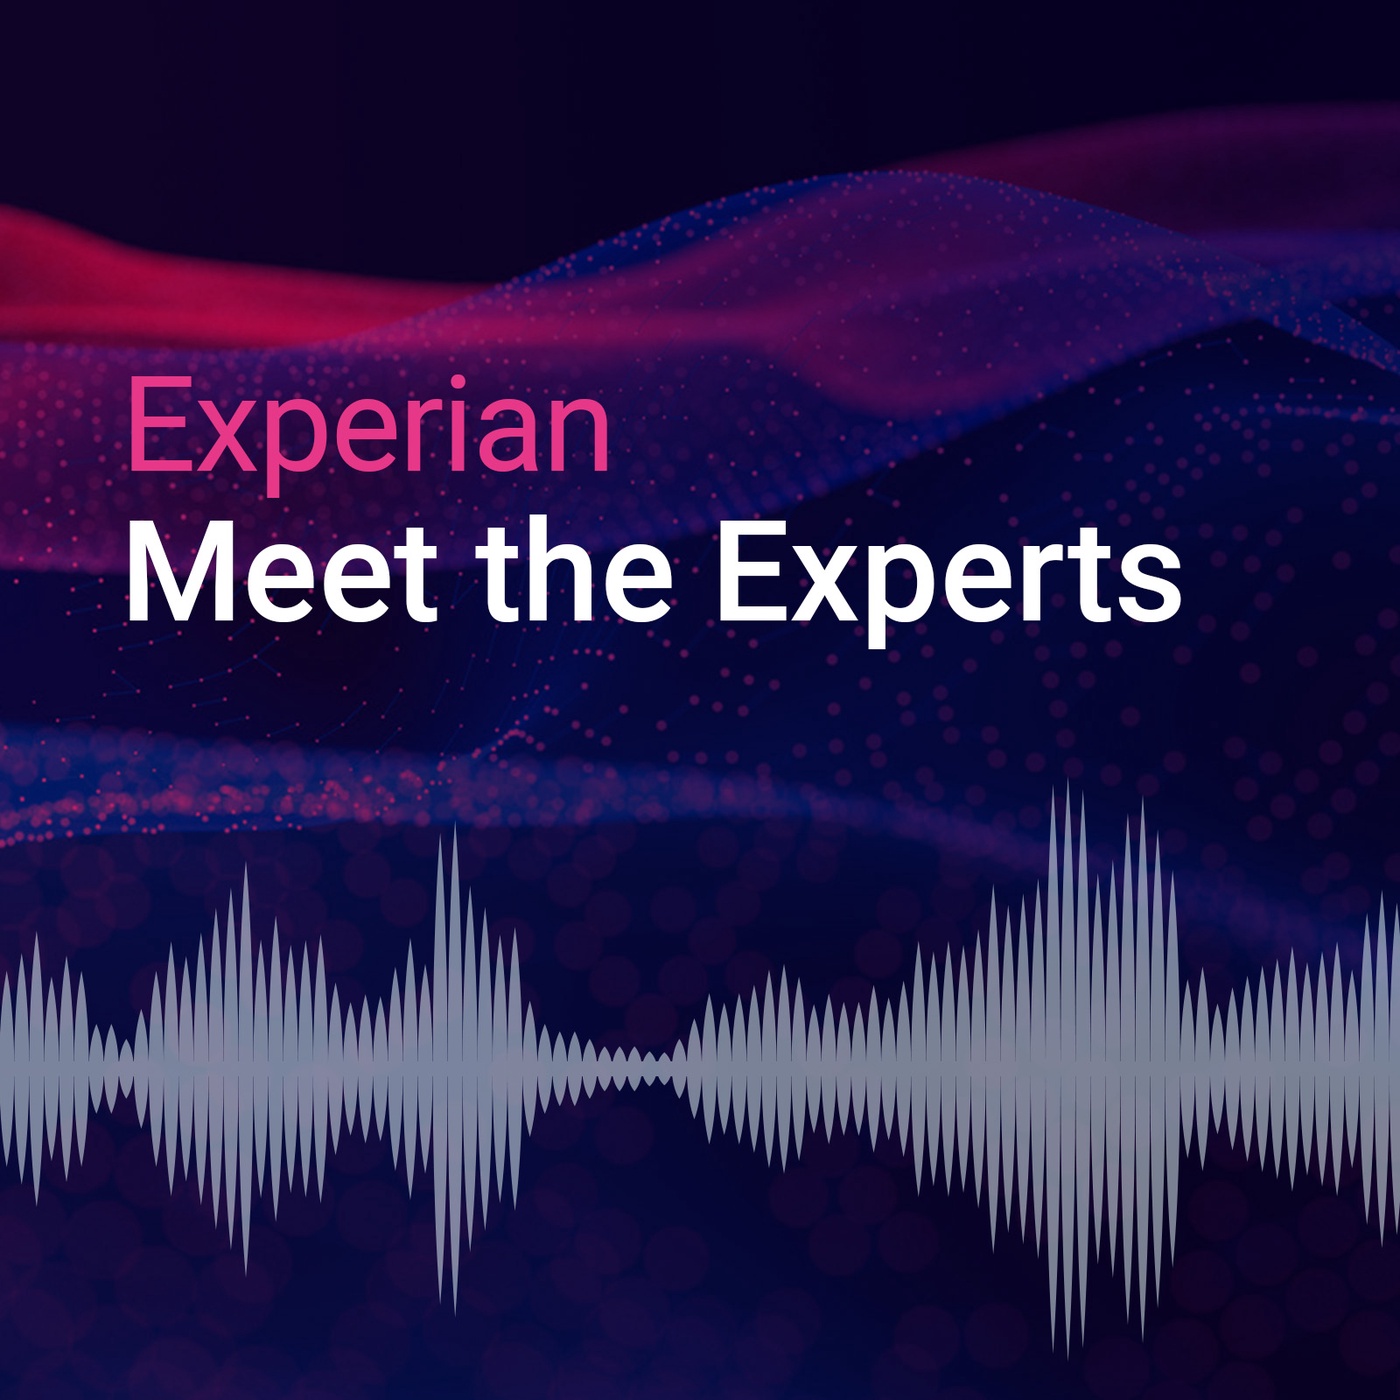 Experian - Meet the Experts